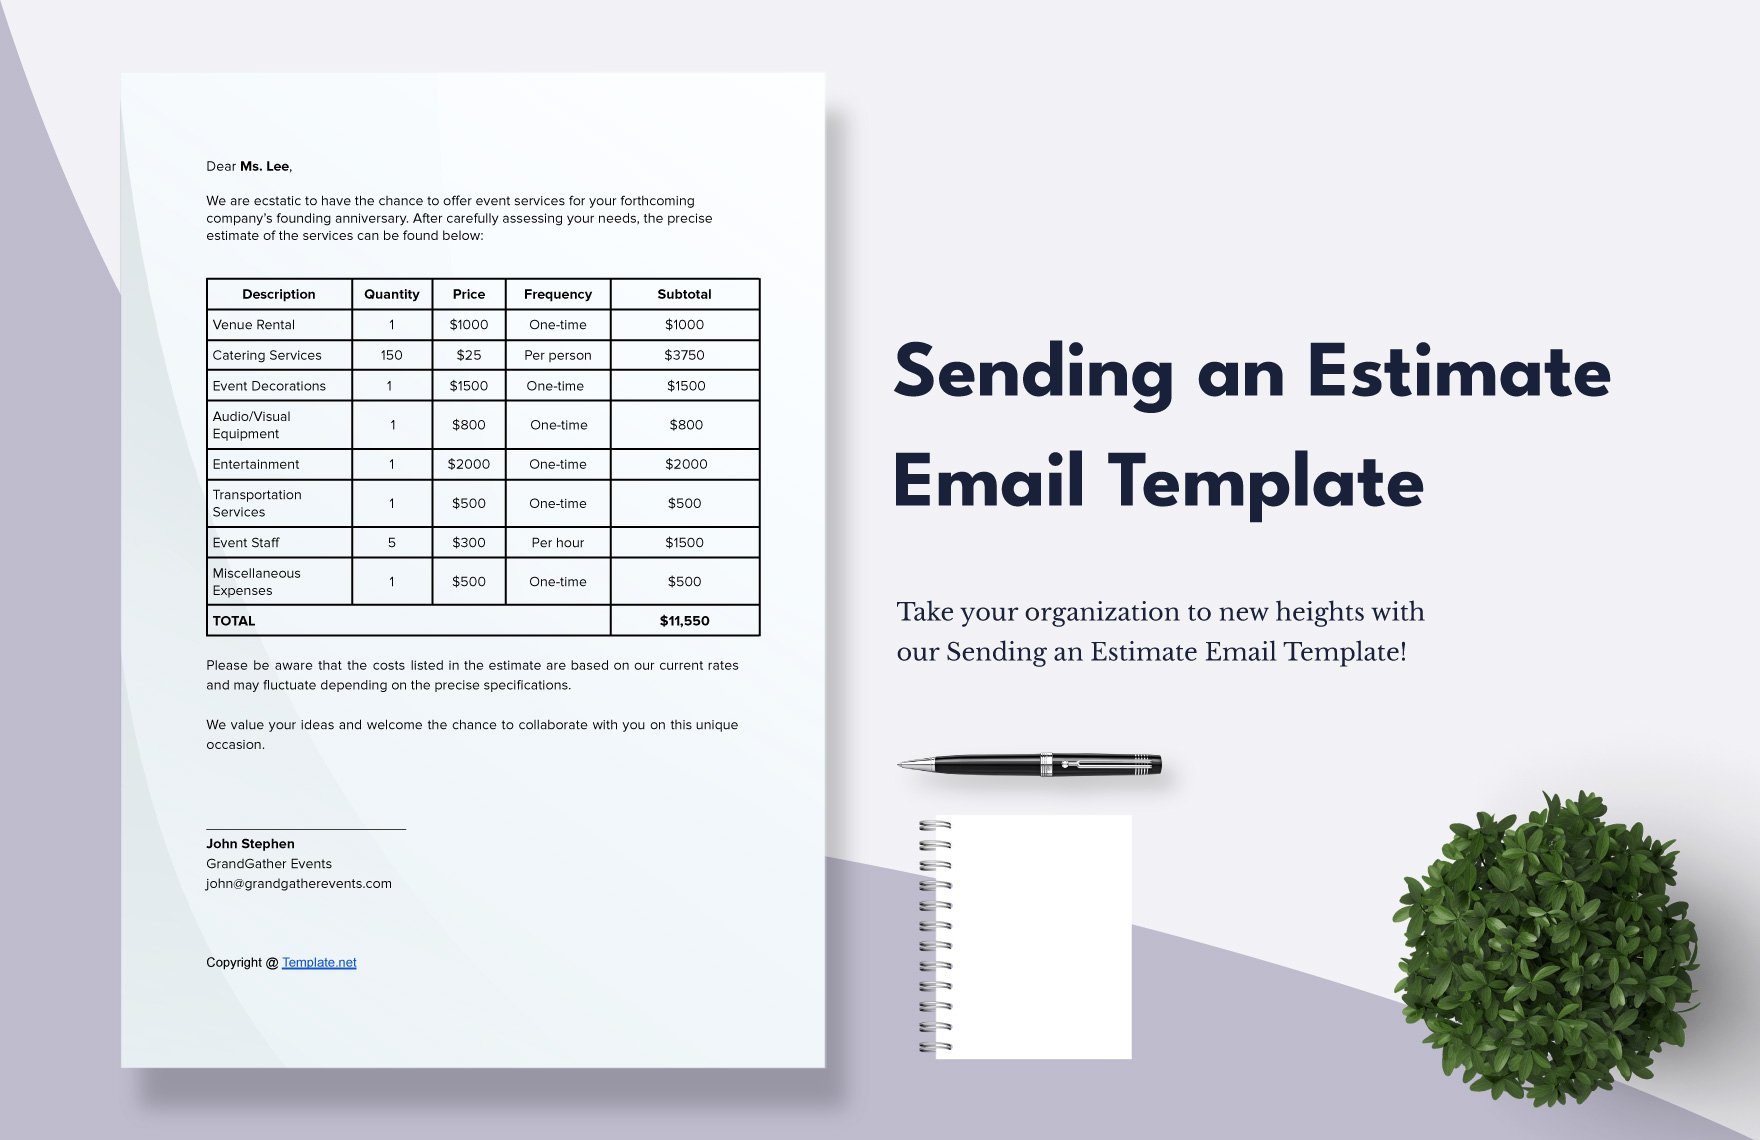 Sending an Estimate Email Template